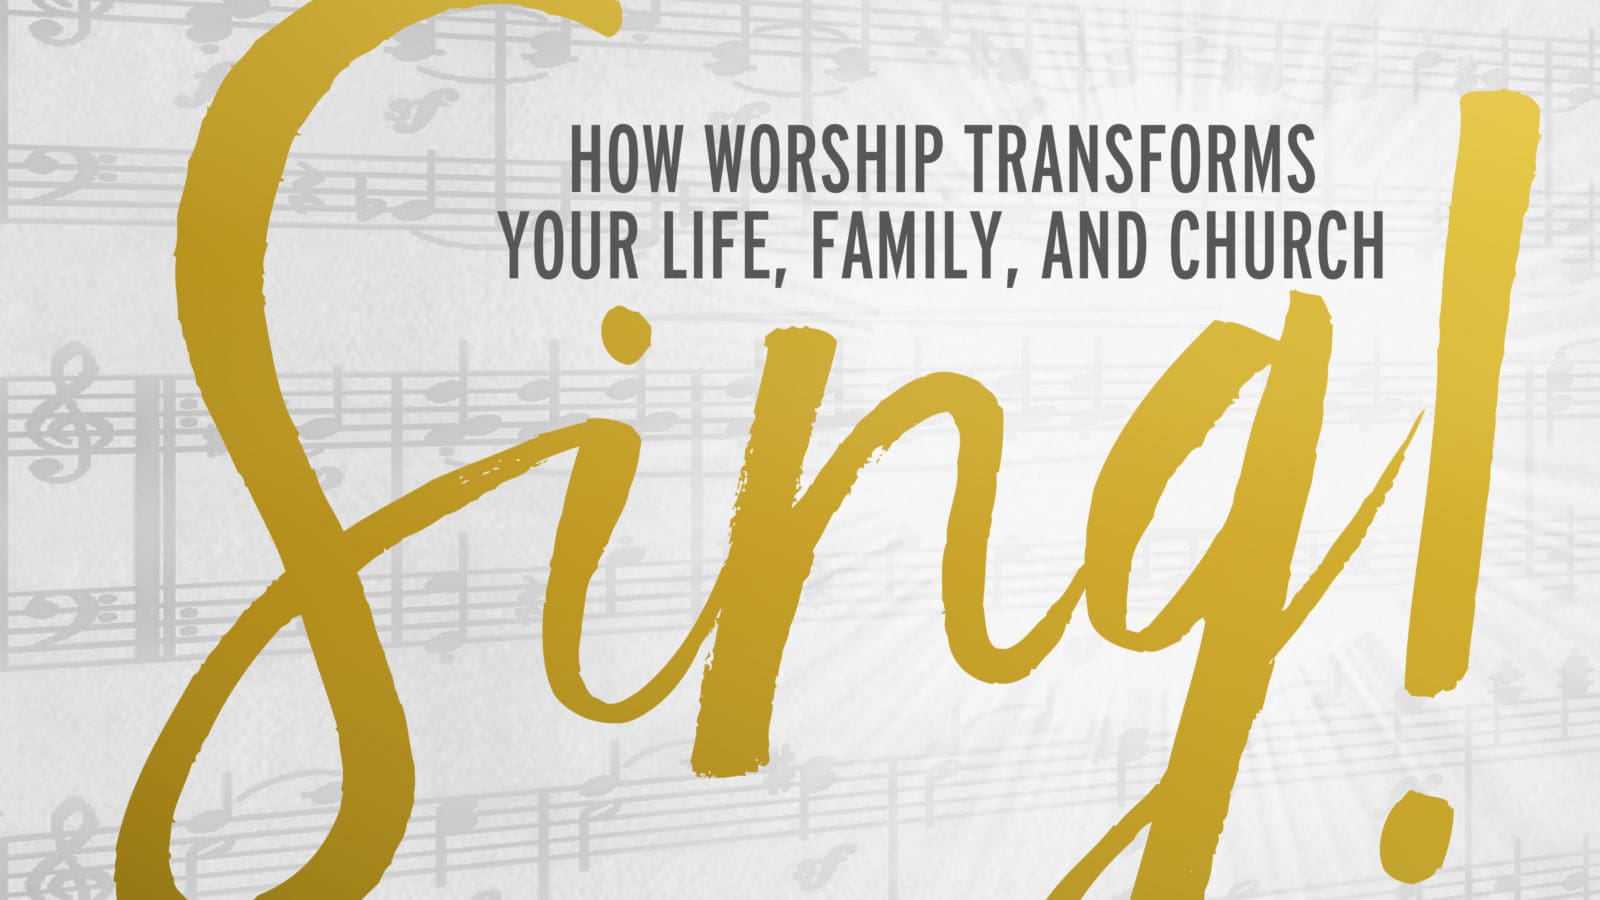 SING: We are Compelled to Sing!